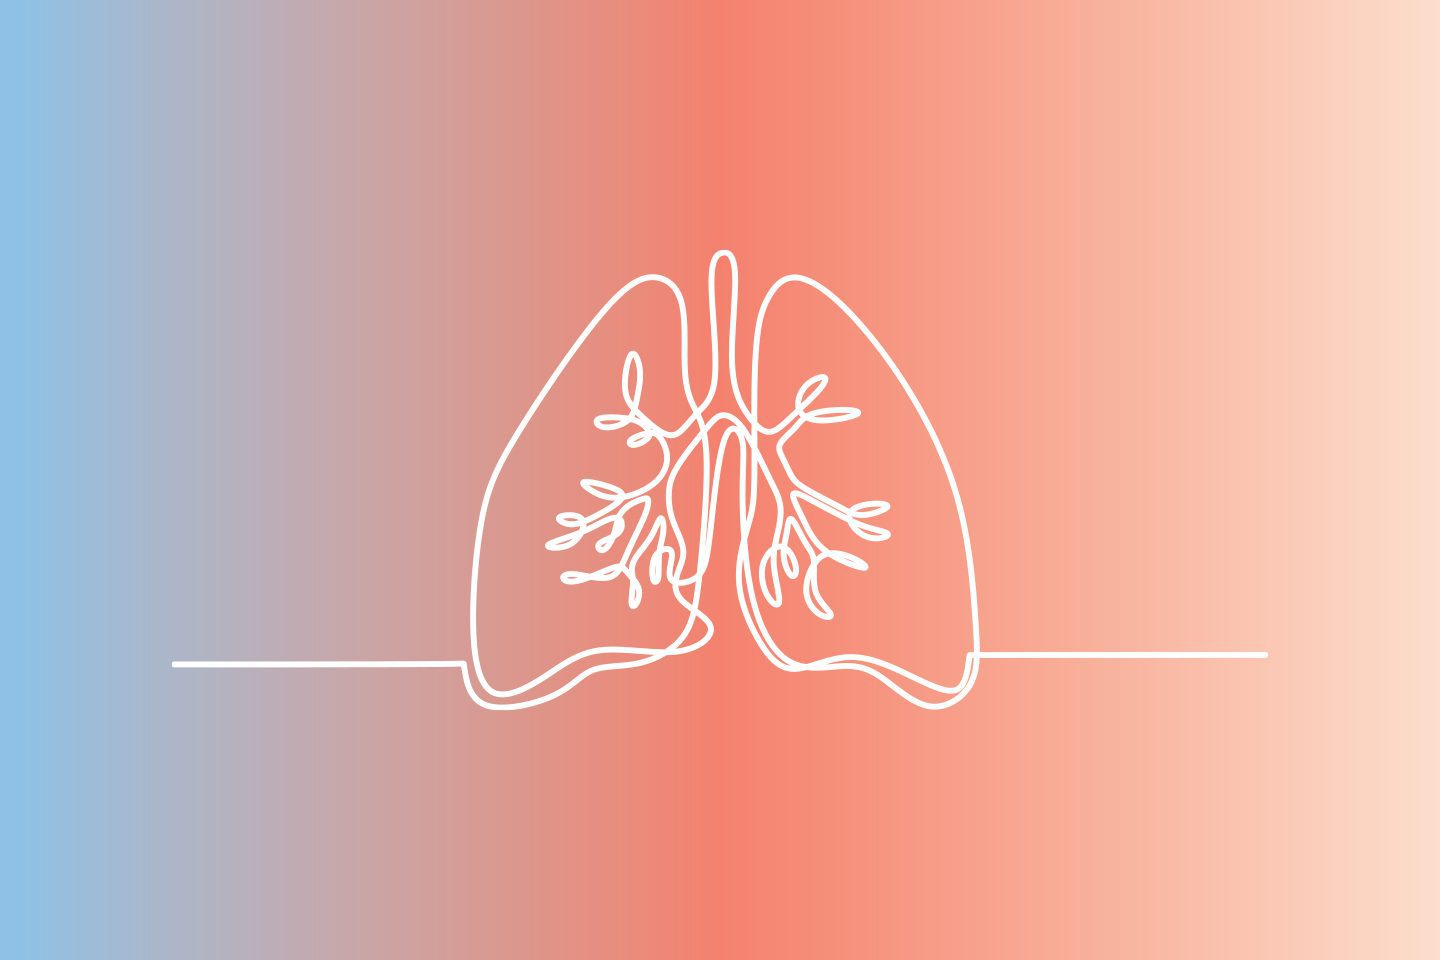 illustration of lungs on a gradient